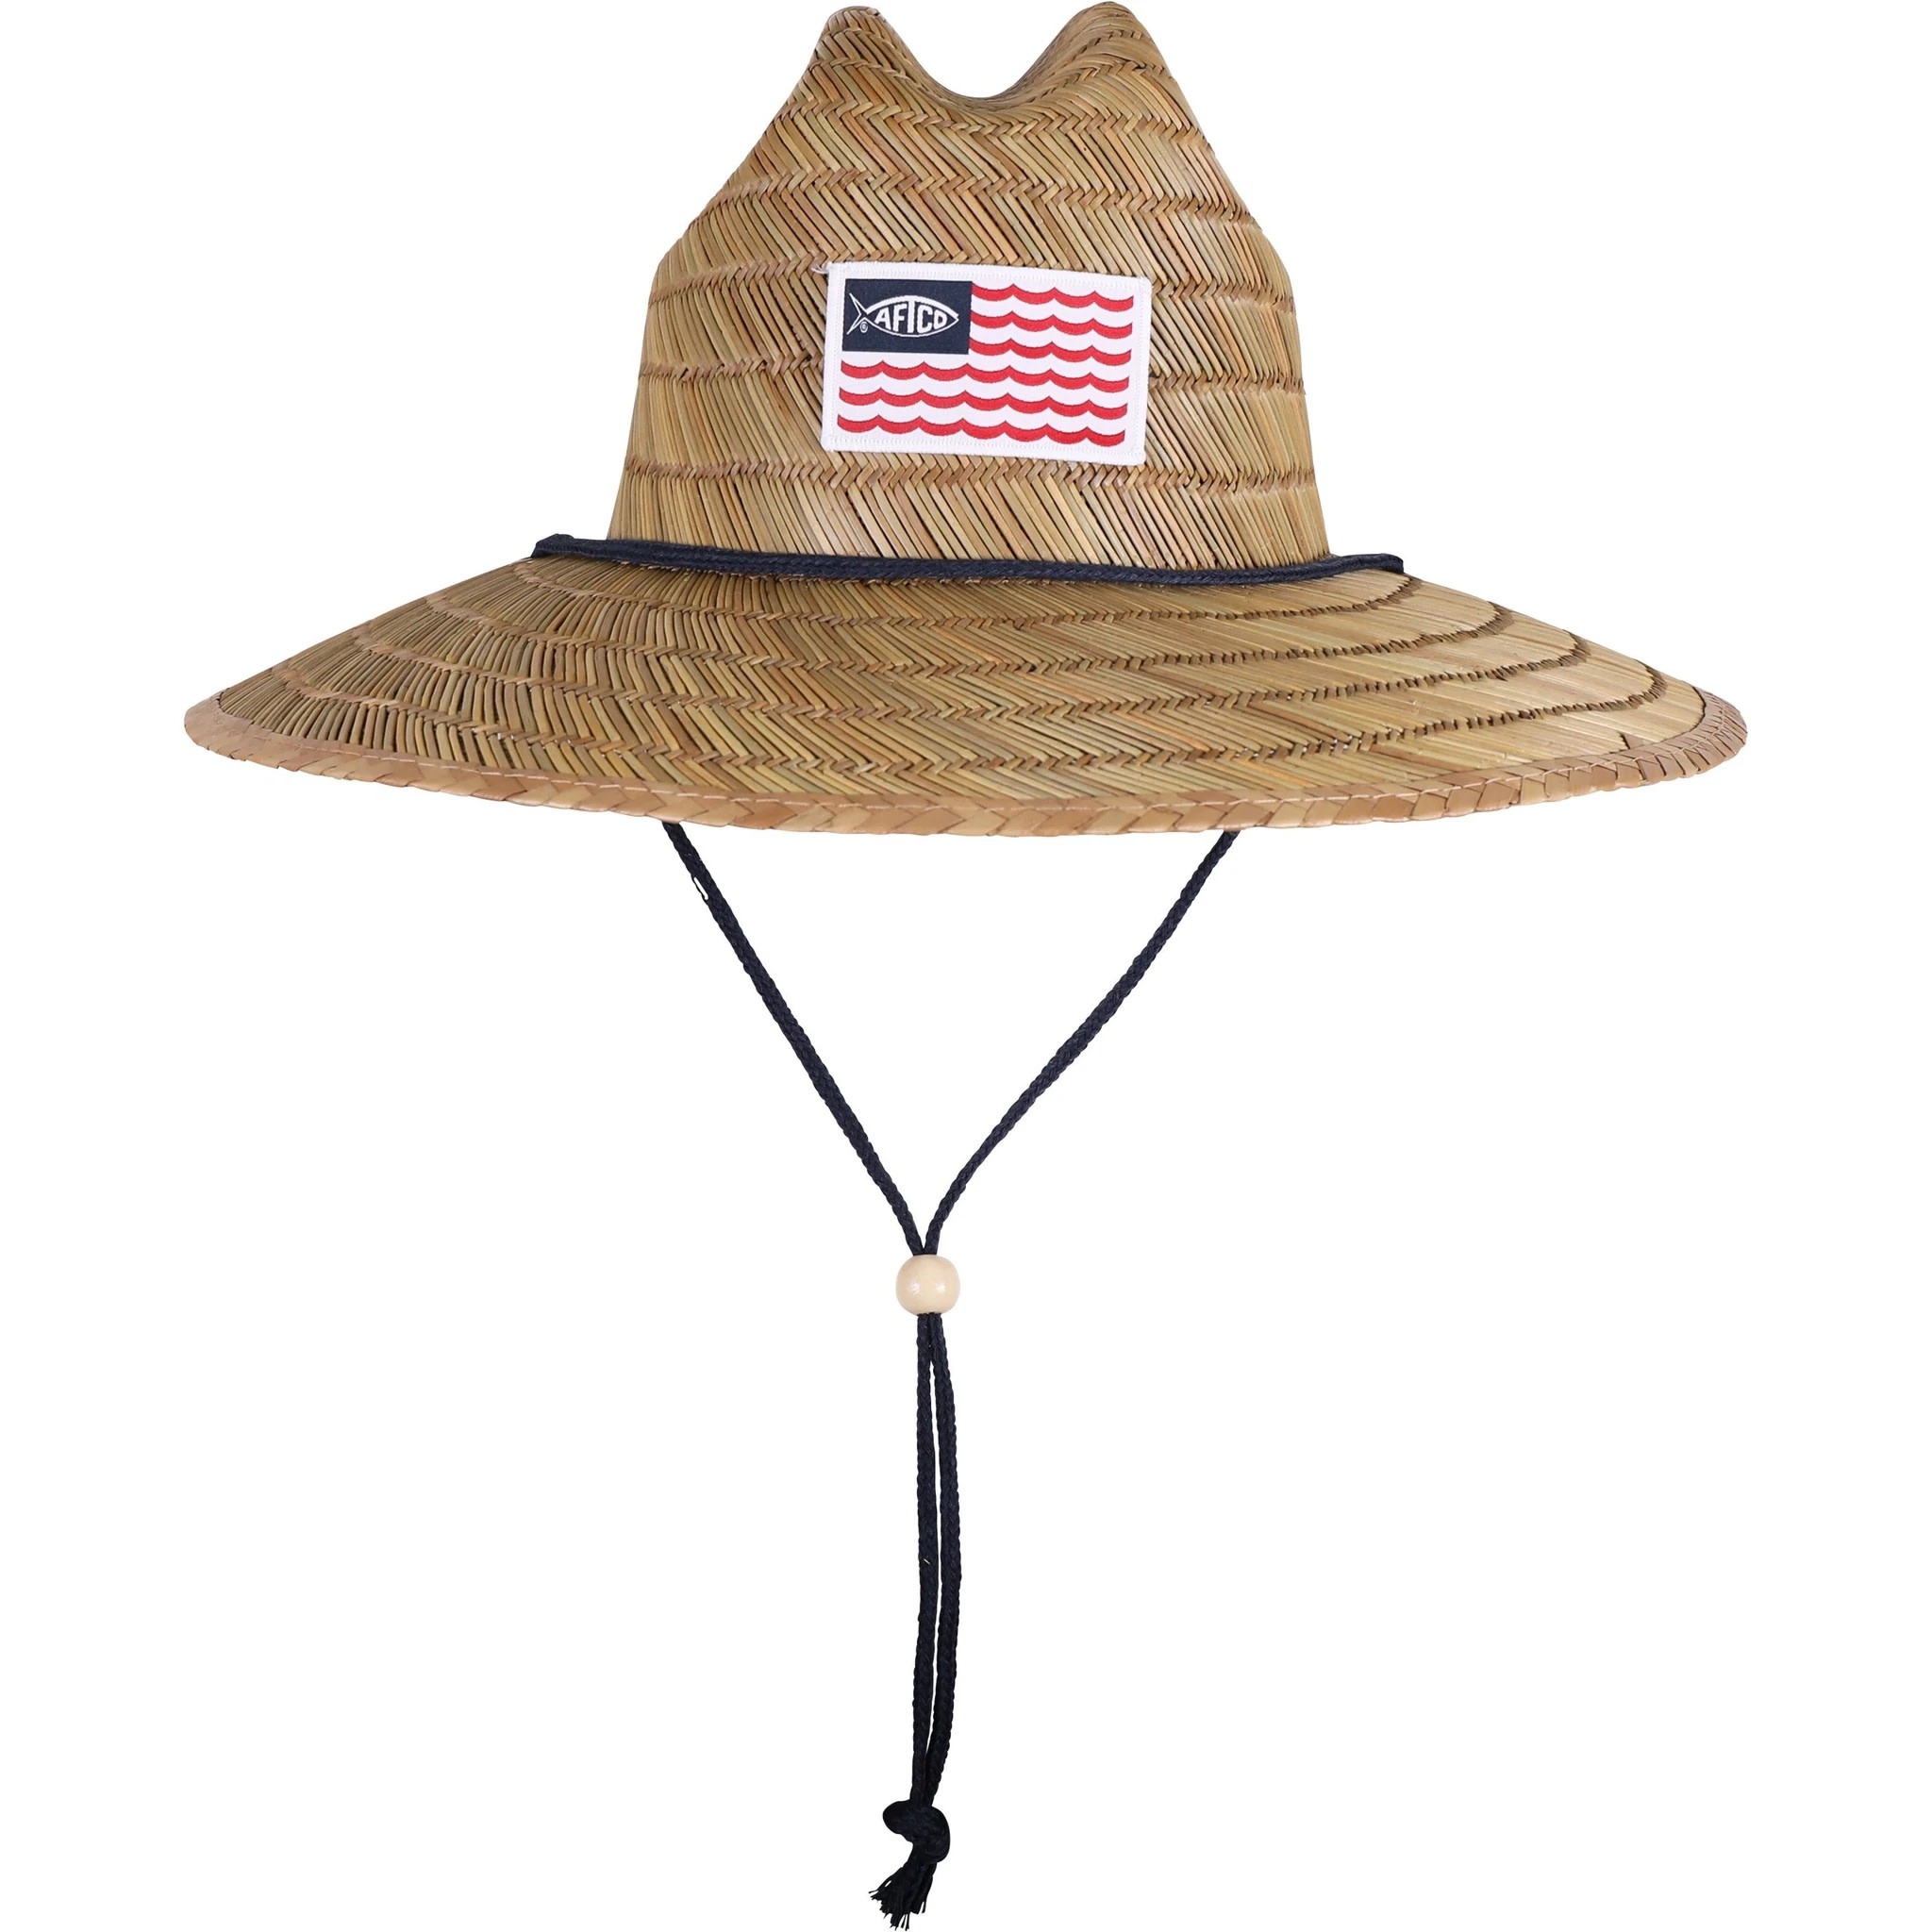 https://cdn.shoplightspeed.com/shops/608250/files/43764139/aftco-bluewater-aftco-palapa-straw-hat.jpg